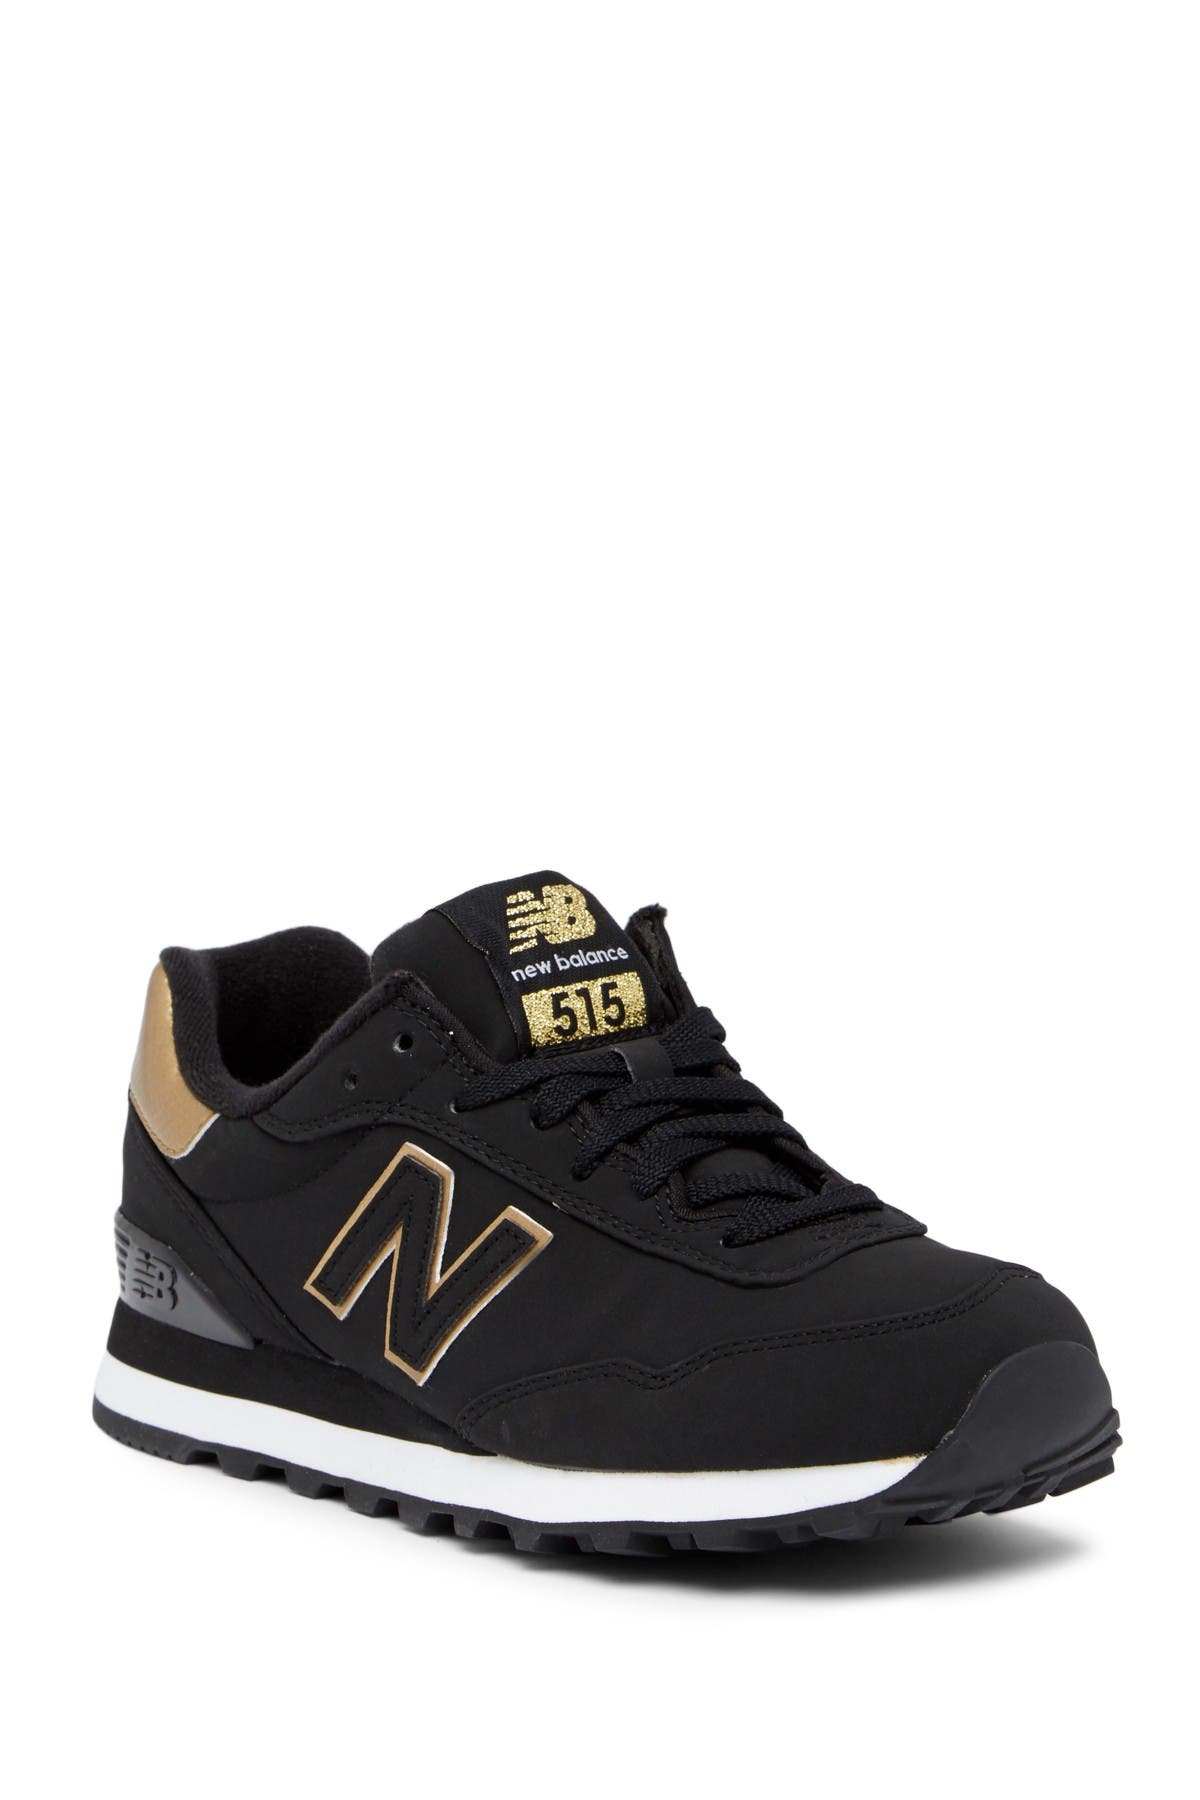 new balance 515 black and rose gold